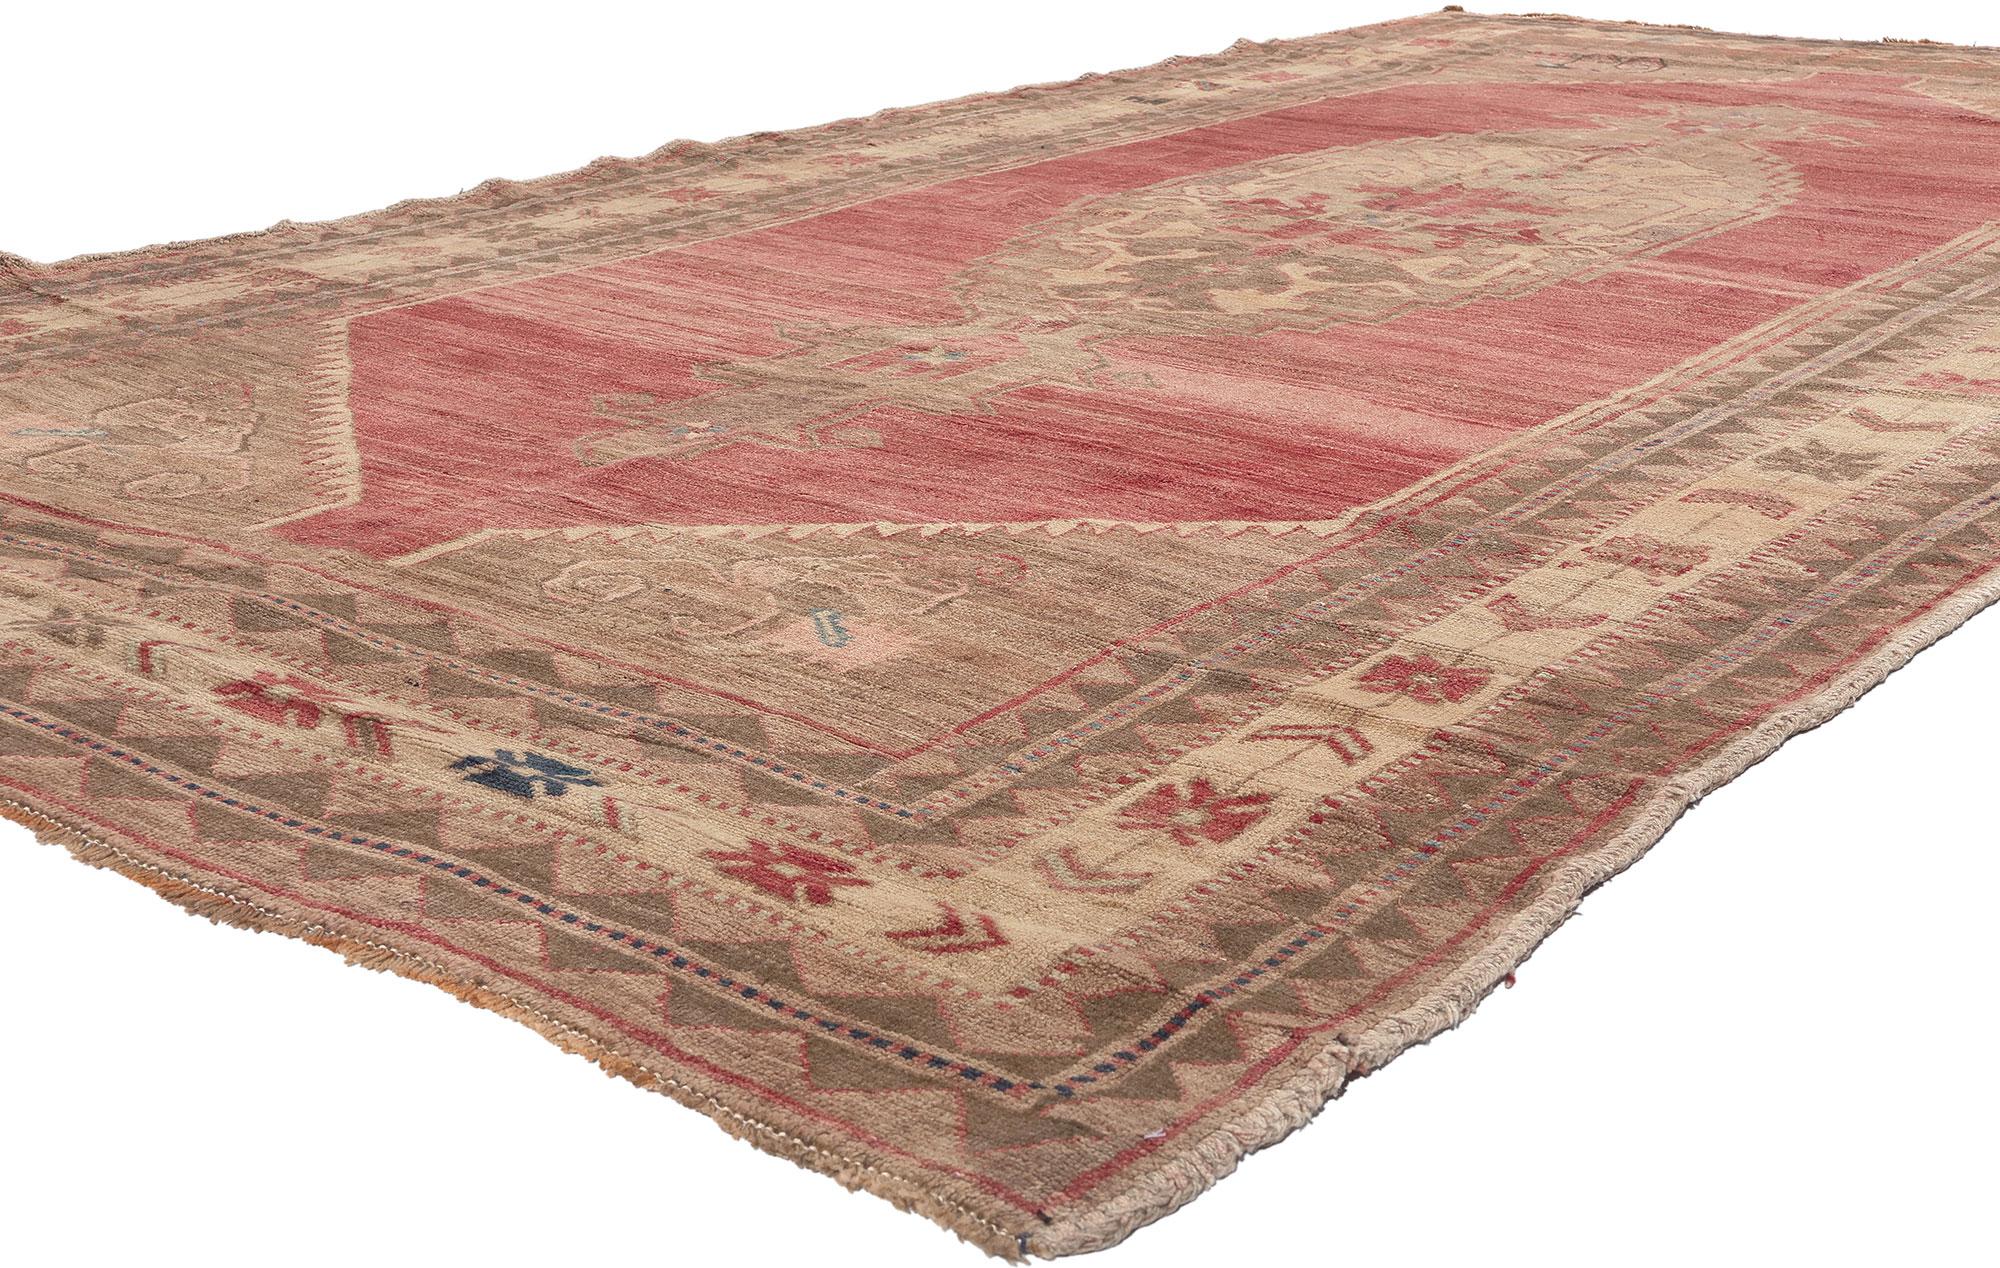 52419 Vintage Turkish Oushak Rug, 06'05 x 11'09. Embark on a journey where tribal enchantment meets traditional sensibility in this meticulously hand-knotted wool vintage Turkish Oushak rug. Rooted deeply in Anatolian tradition and adorned with